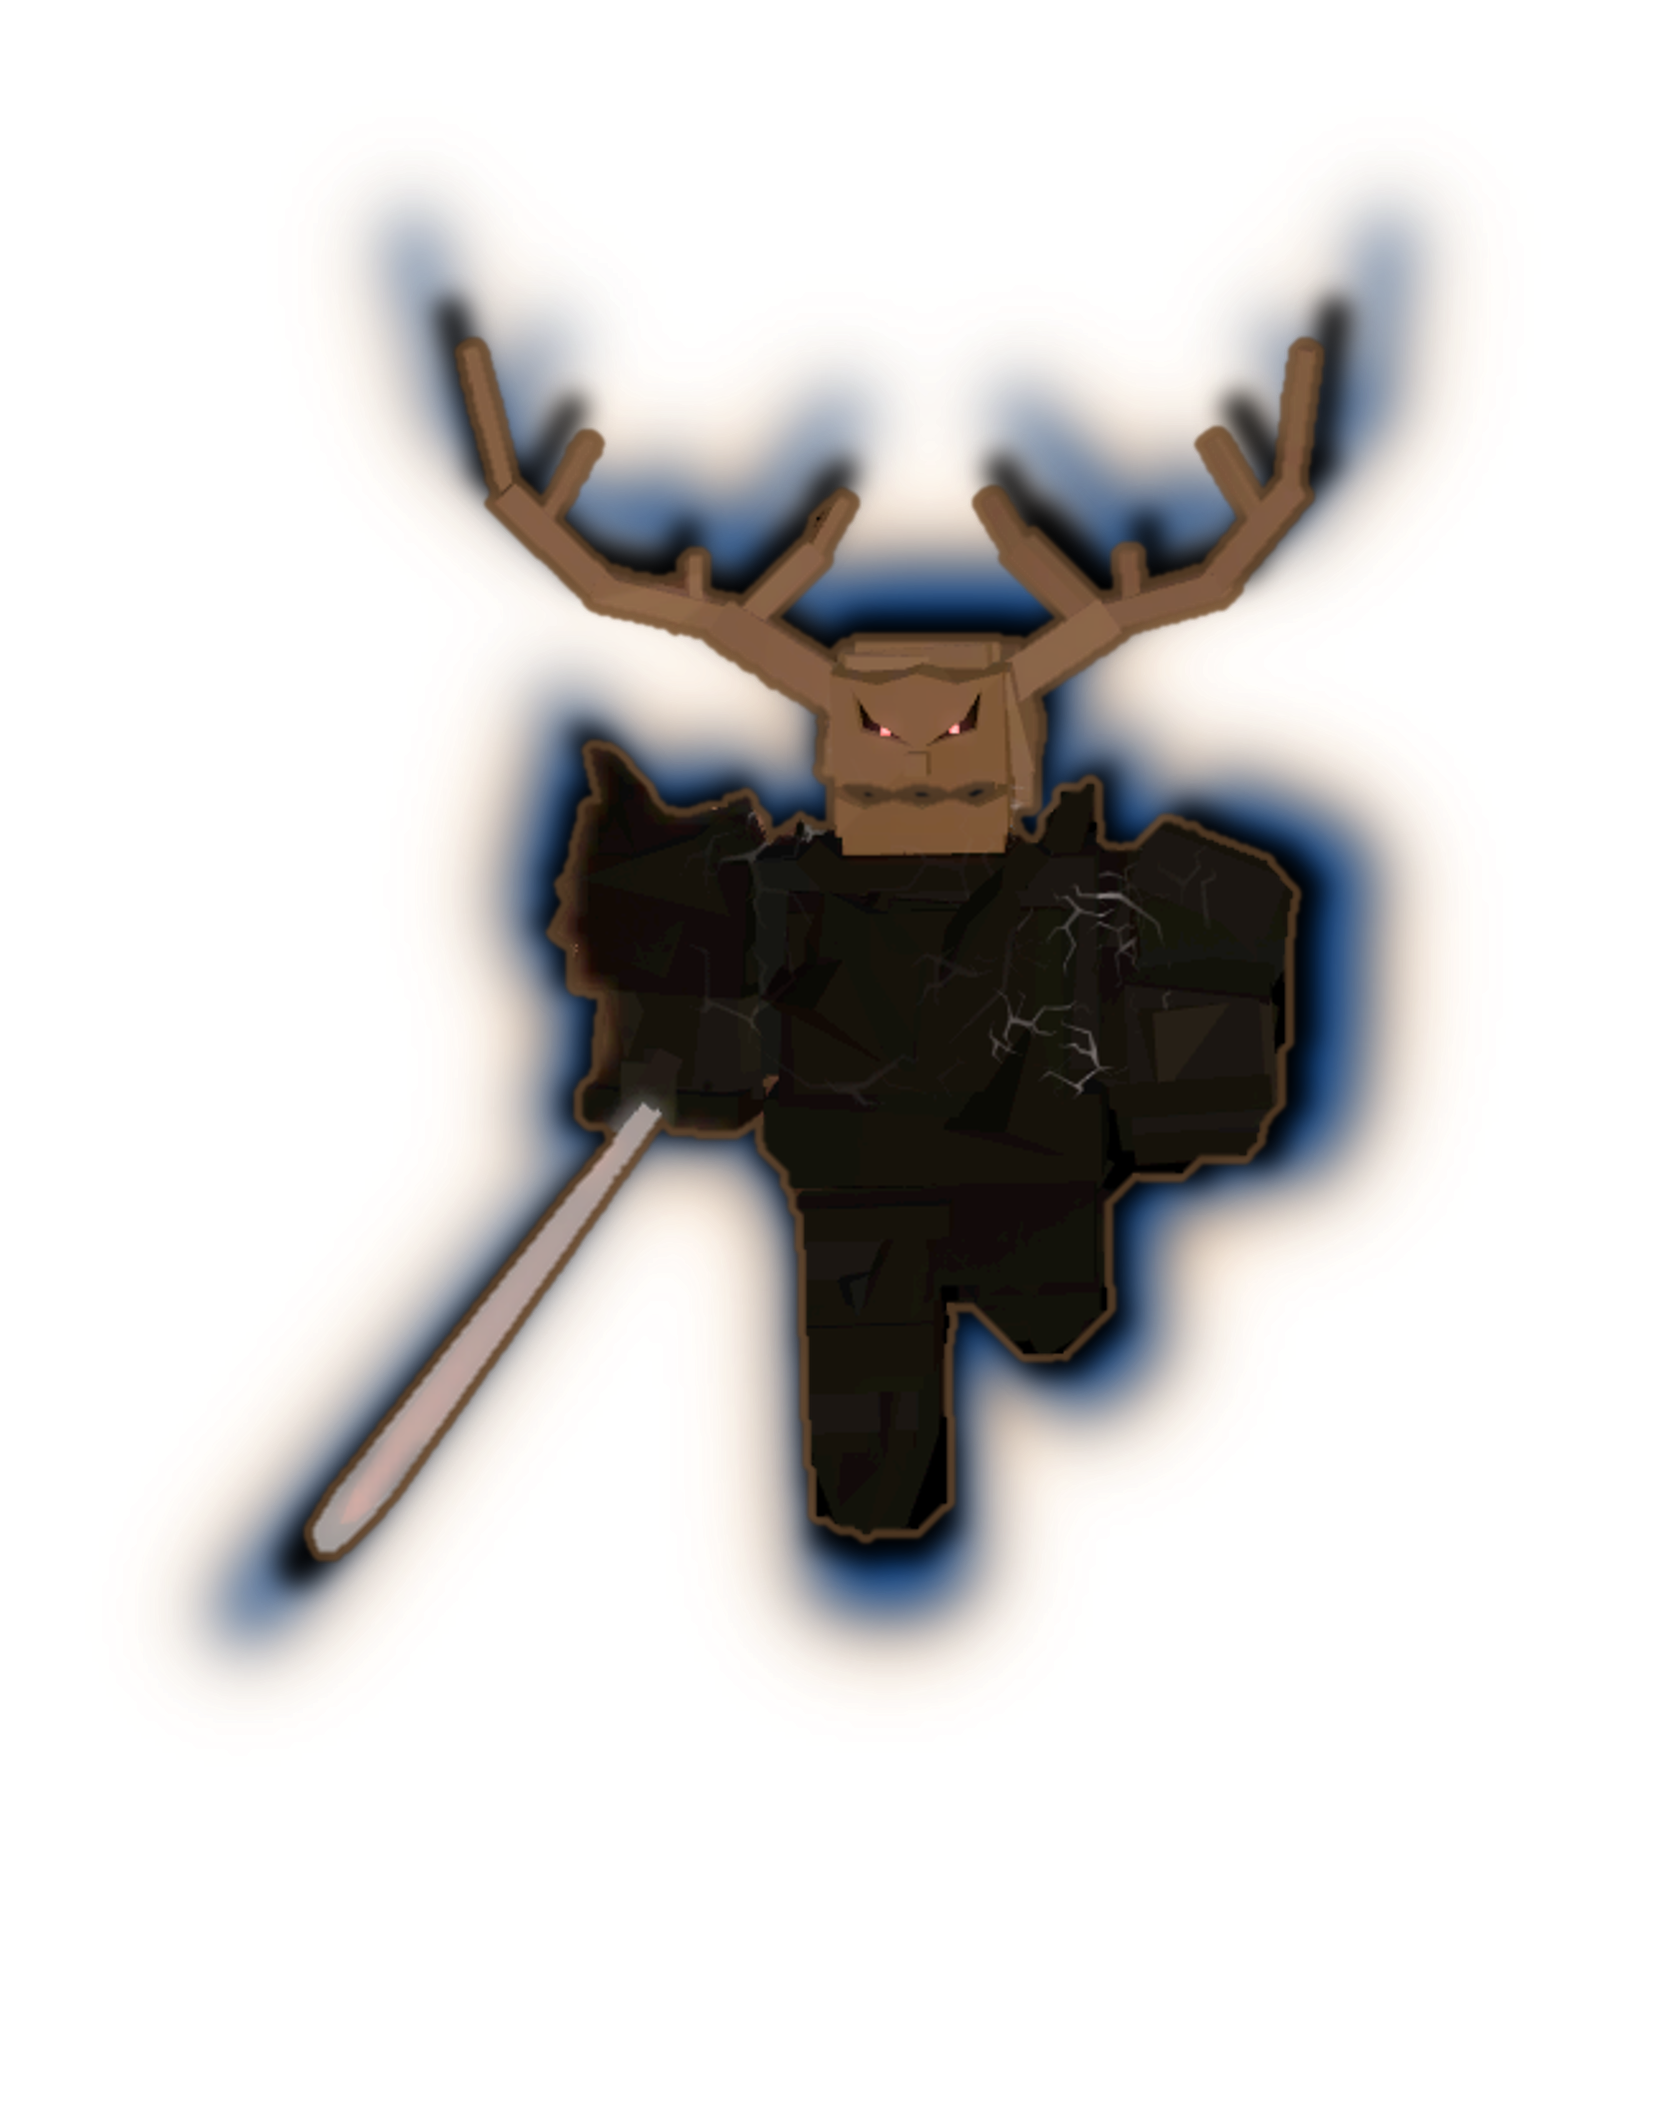 The Lost Monster Fantastic Frontier Roblox Wiki - roblox wiki fantastic frontier